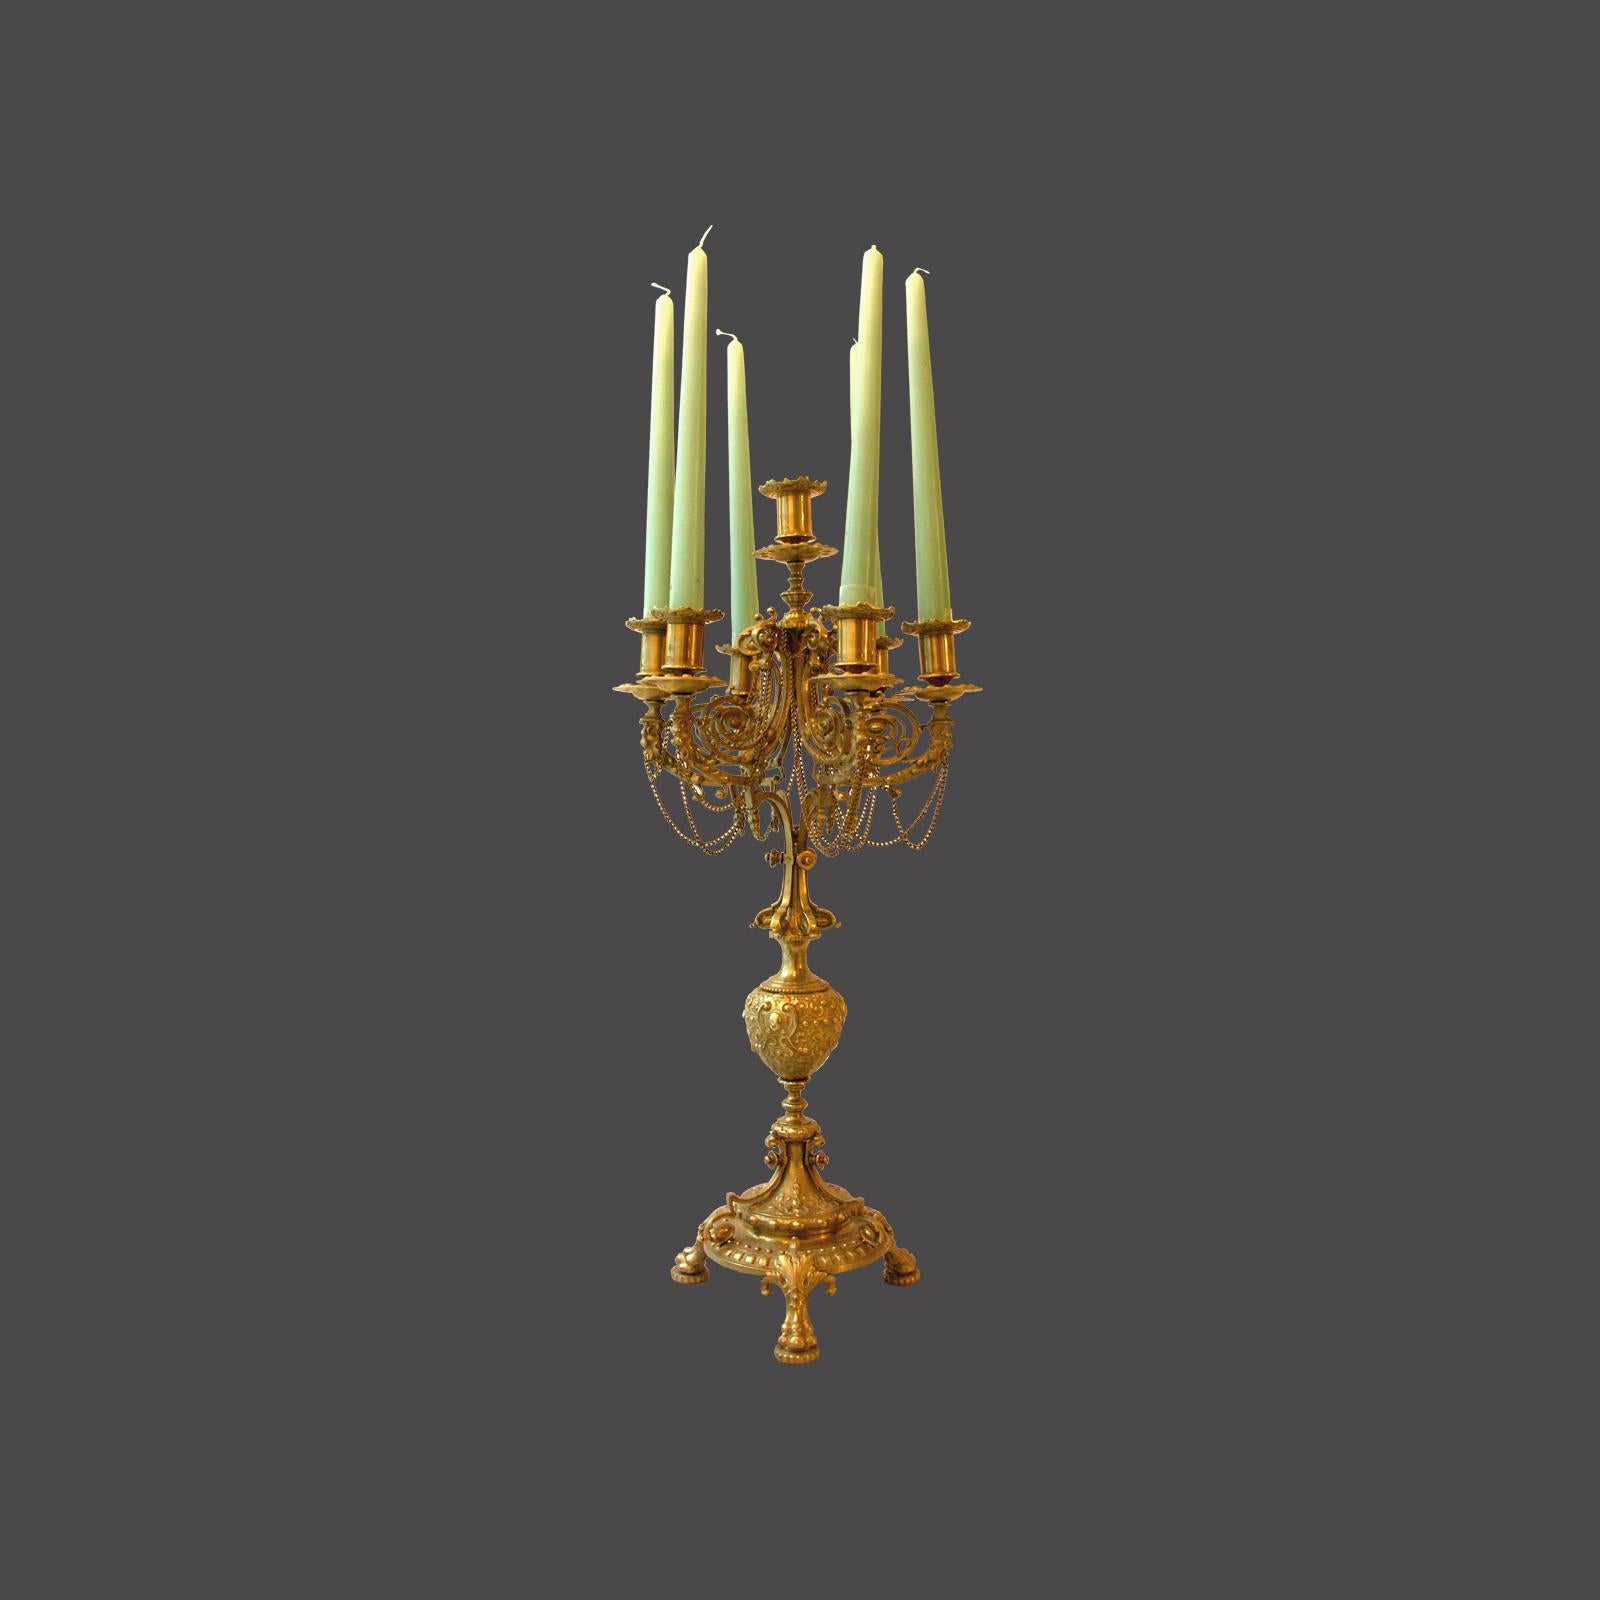 Gothic Revival Set of Original Historistic Candlesticks Candle Holder Louis Seize Style For Sale